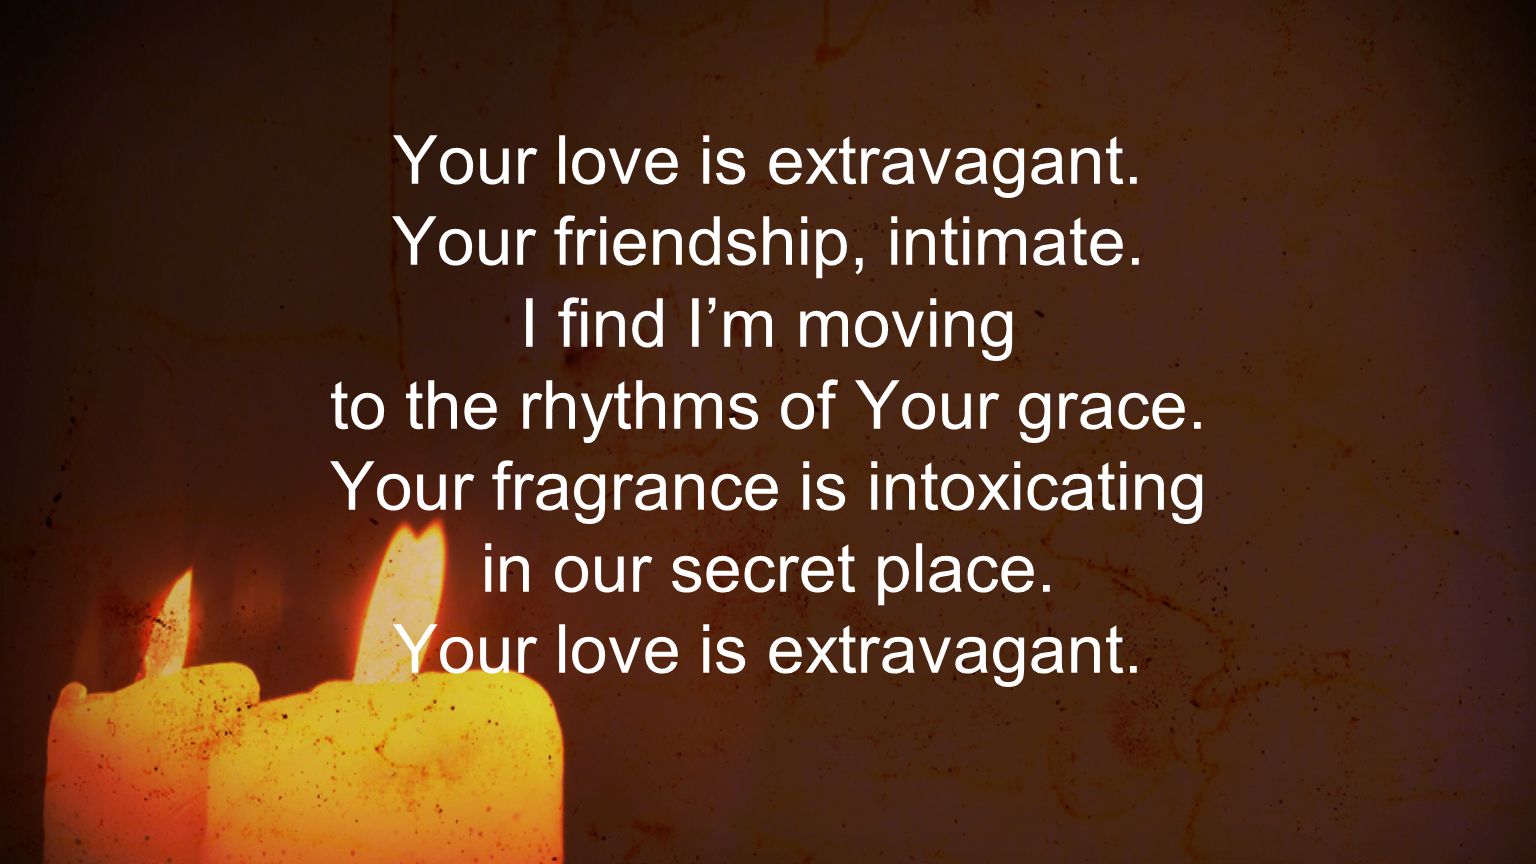 Your love is extravagant. Your friendship, intimate.